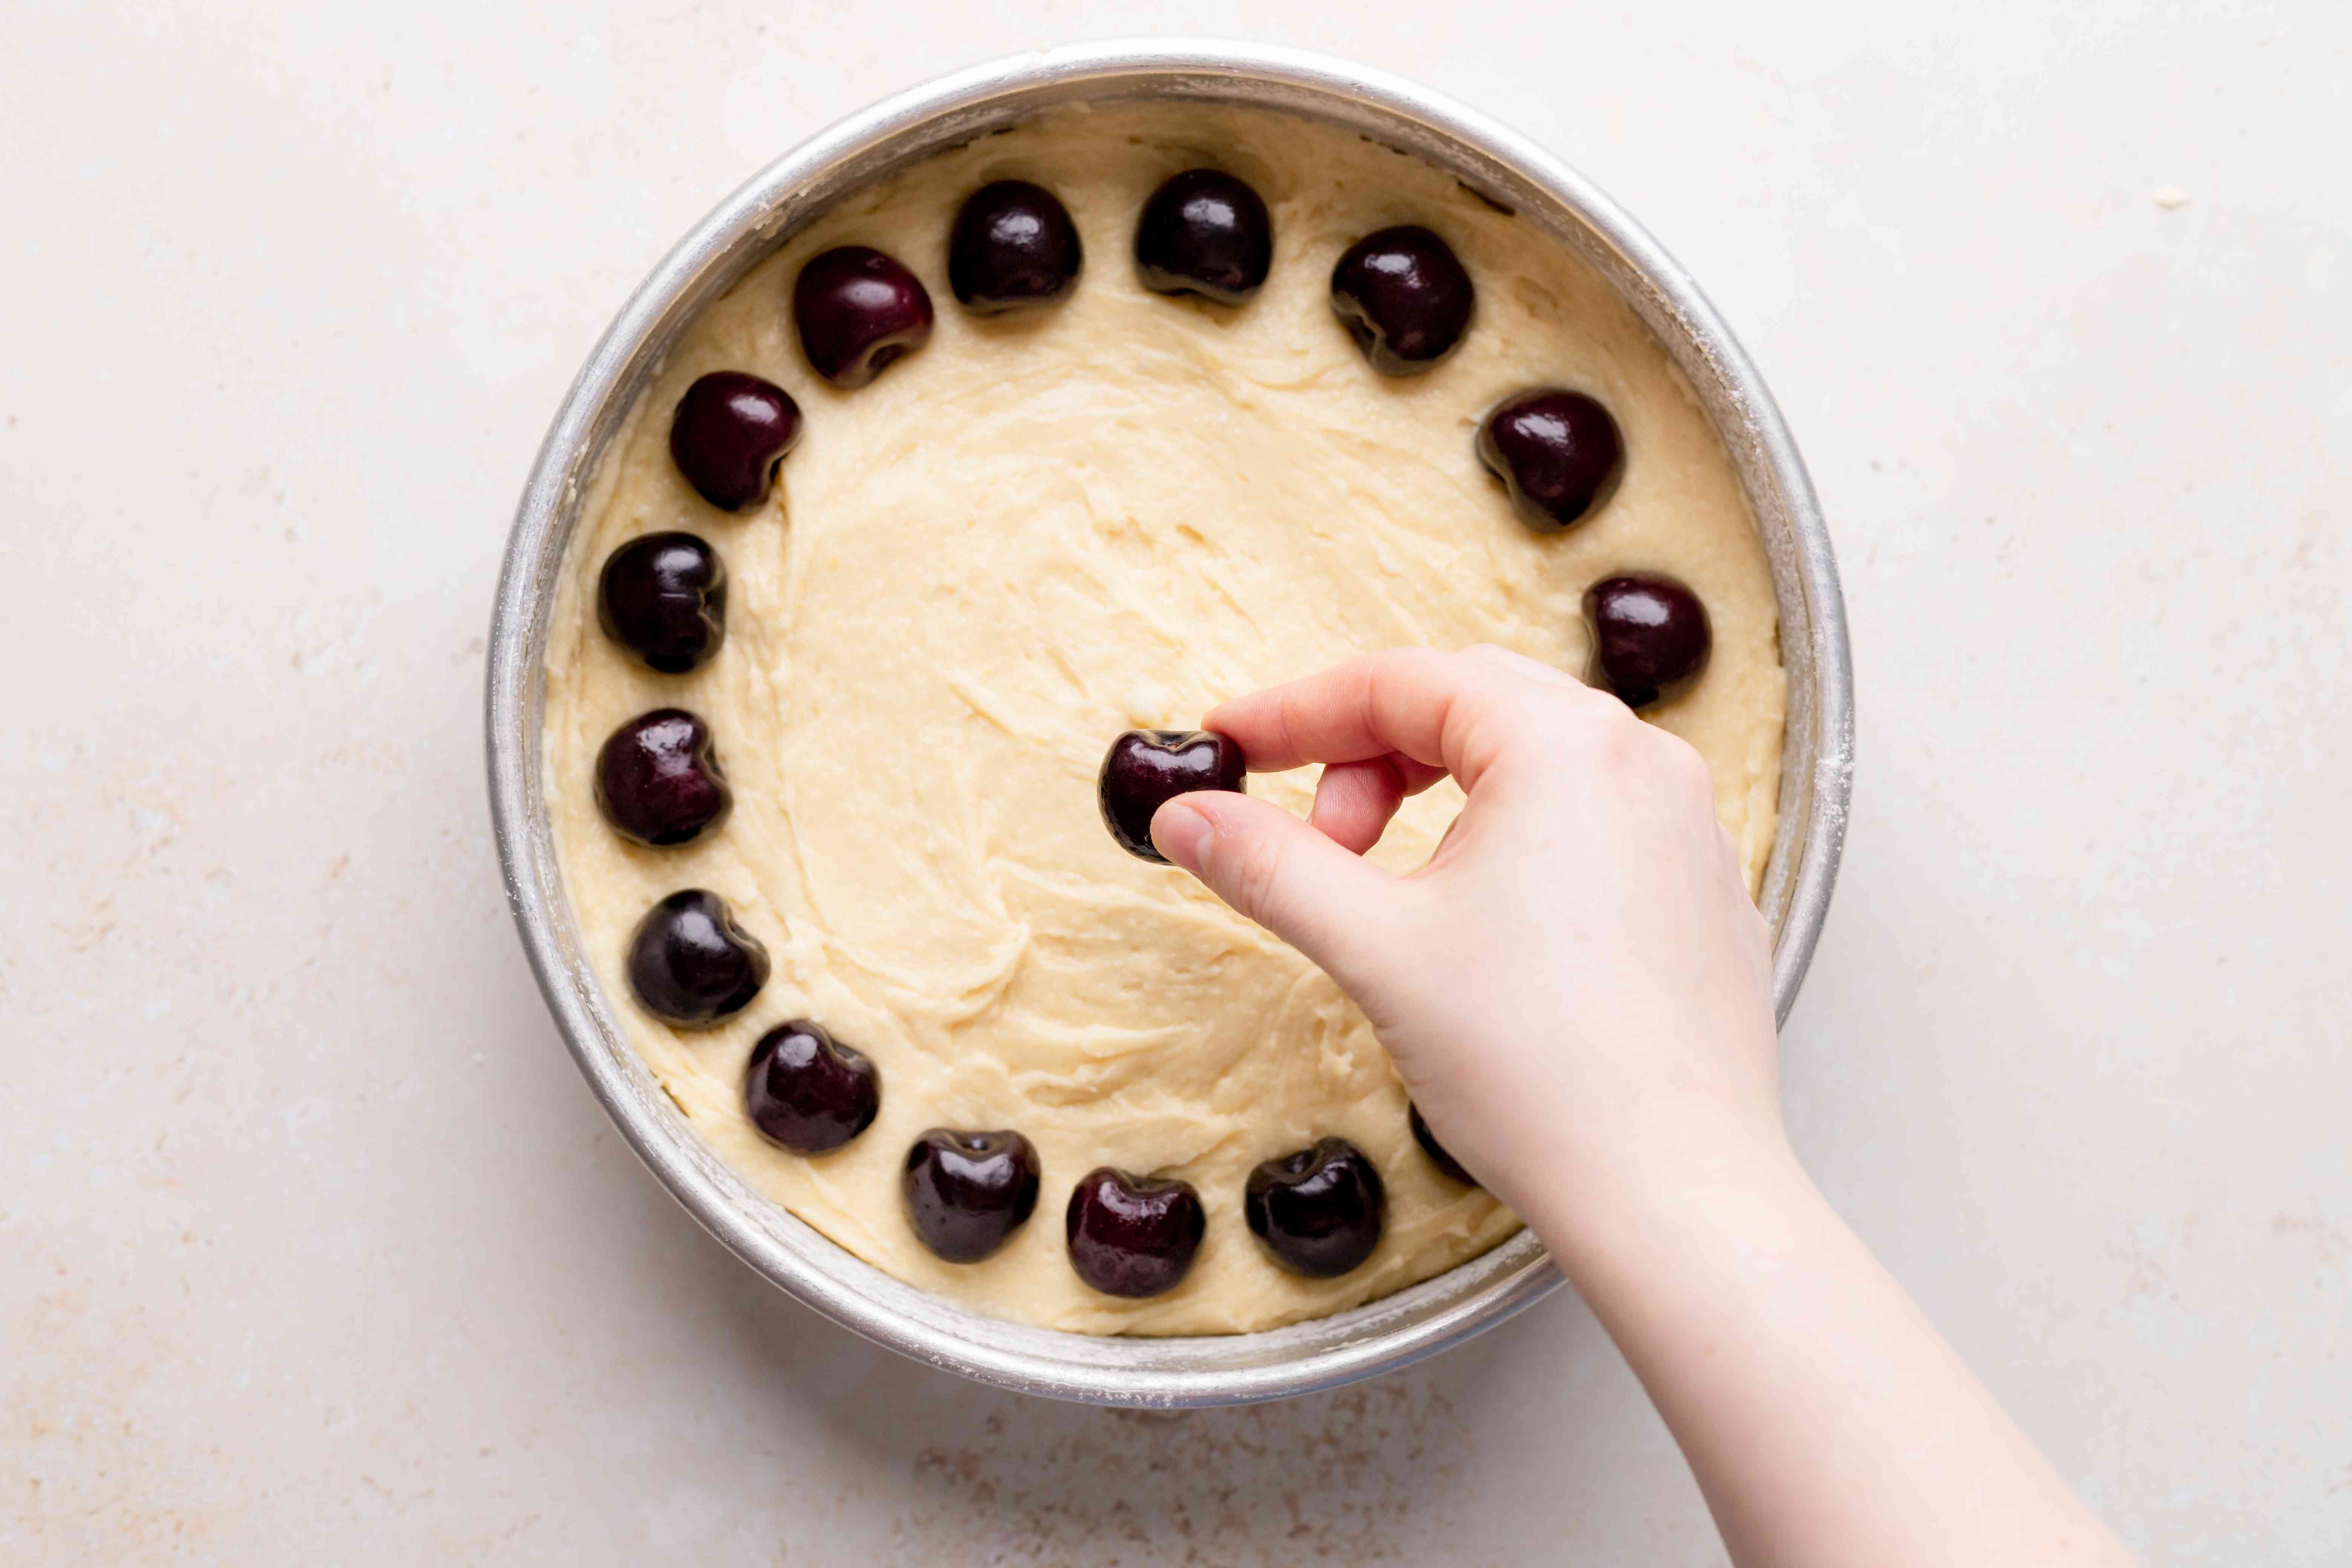 Placing fresh cherries on the batter of a cake to make a cherry cake from scratch.